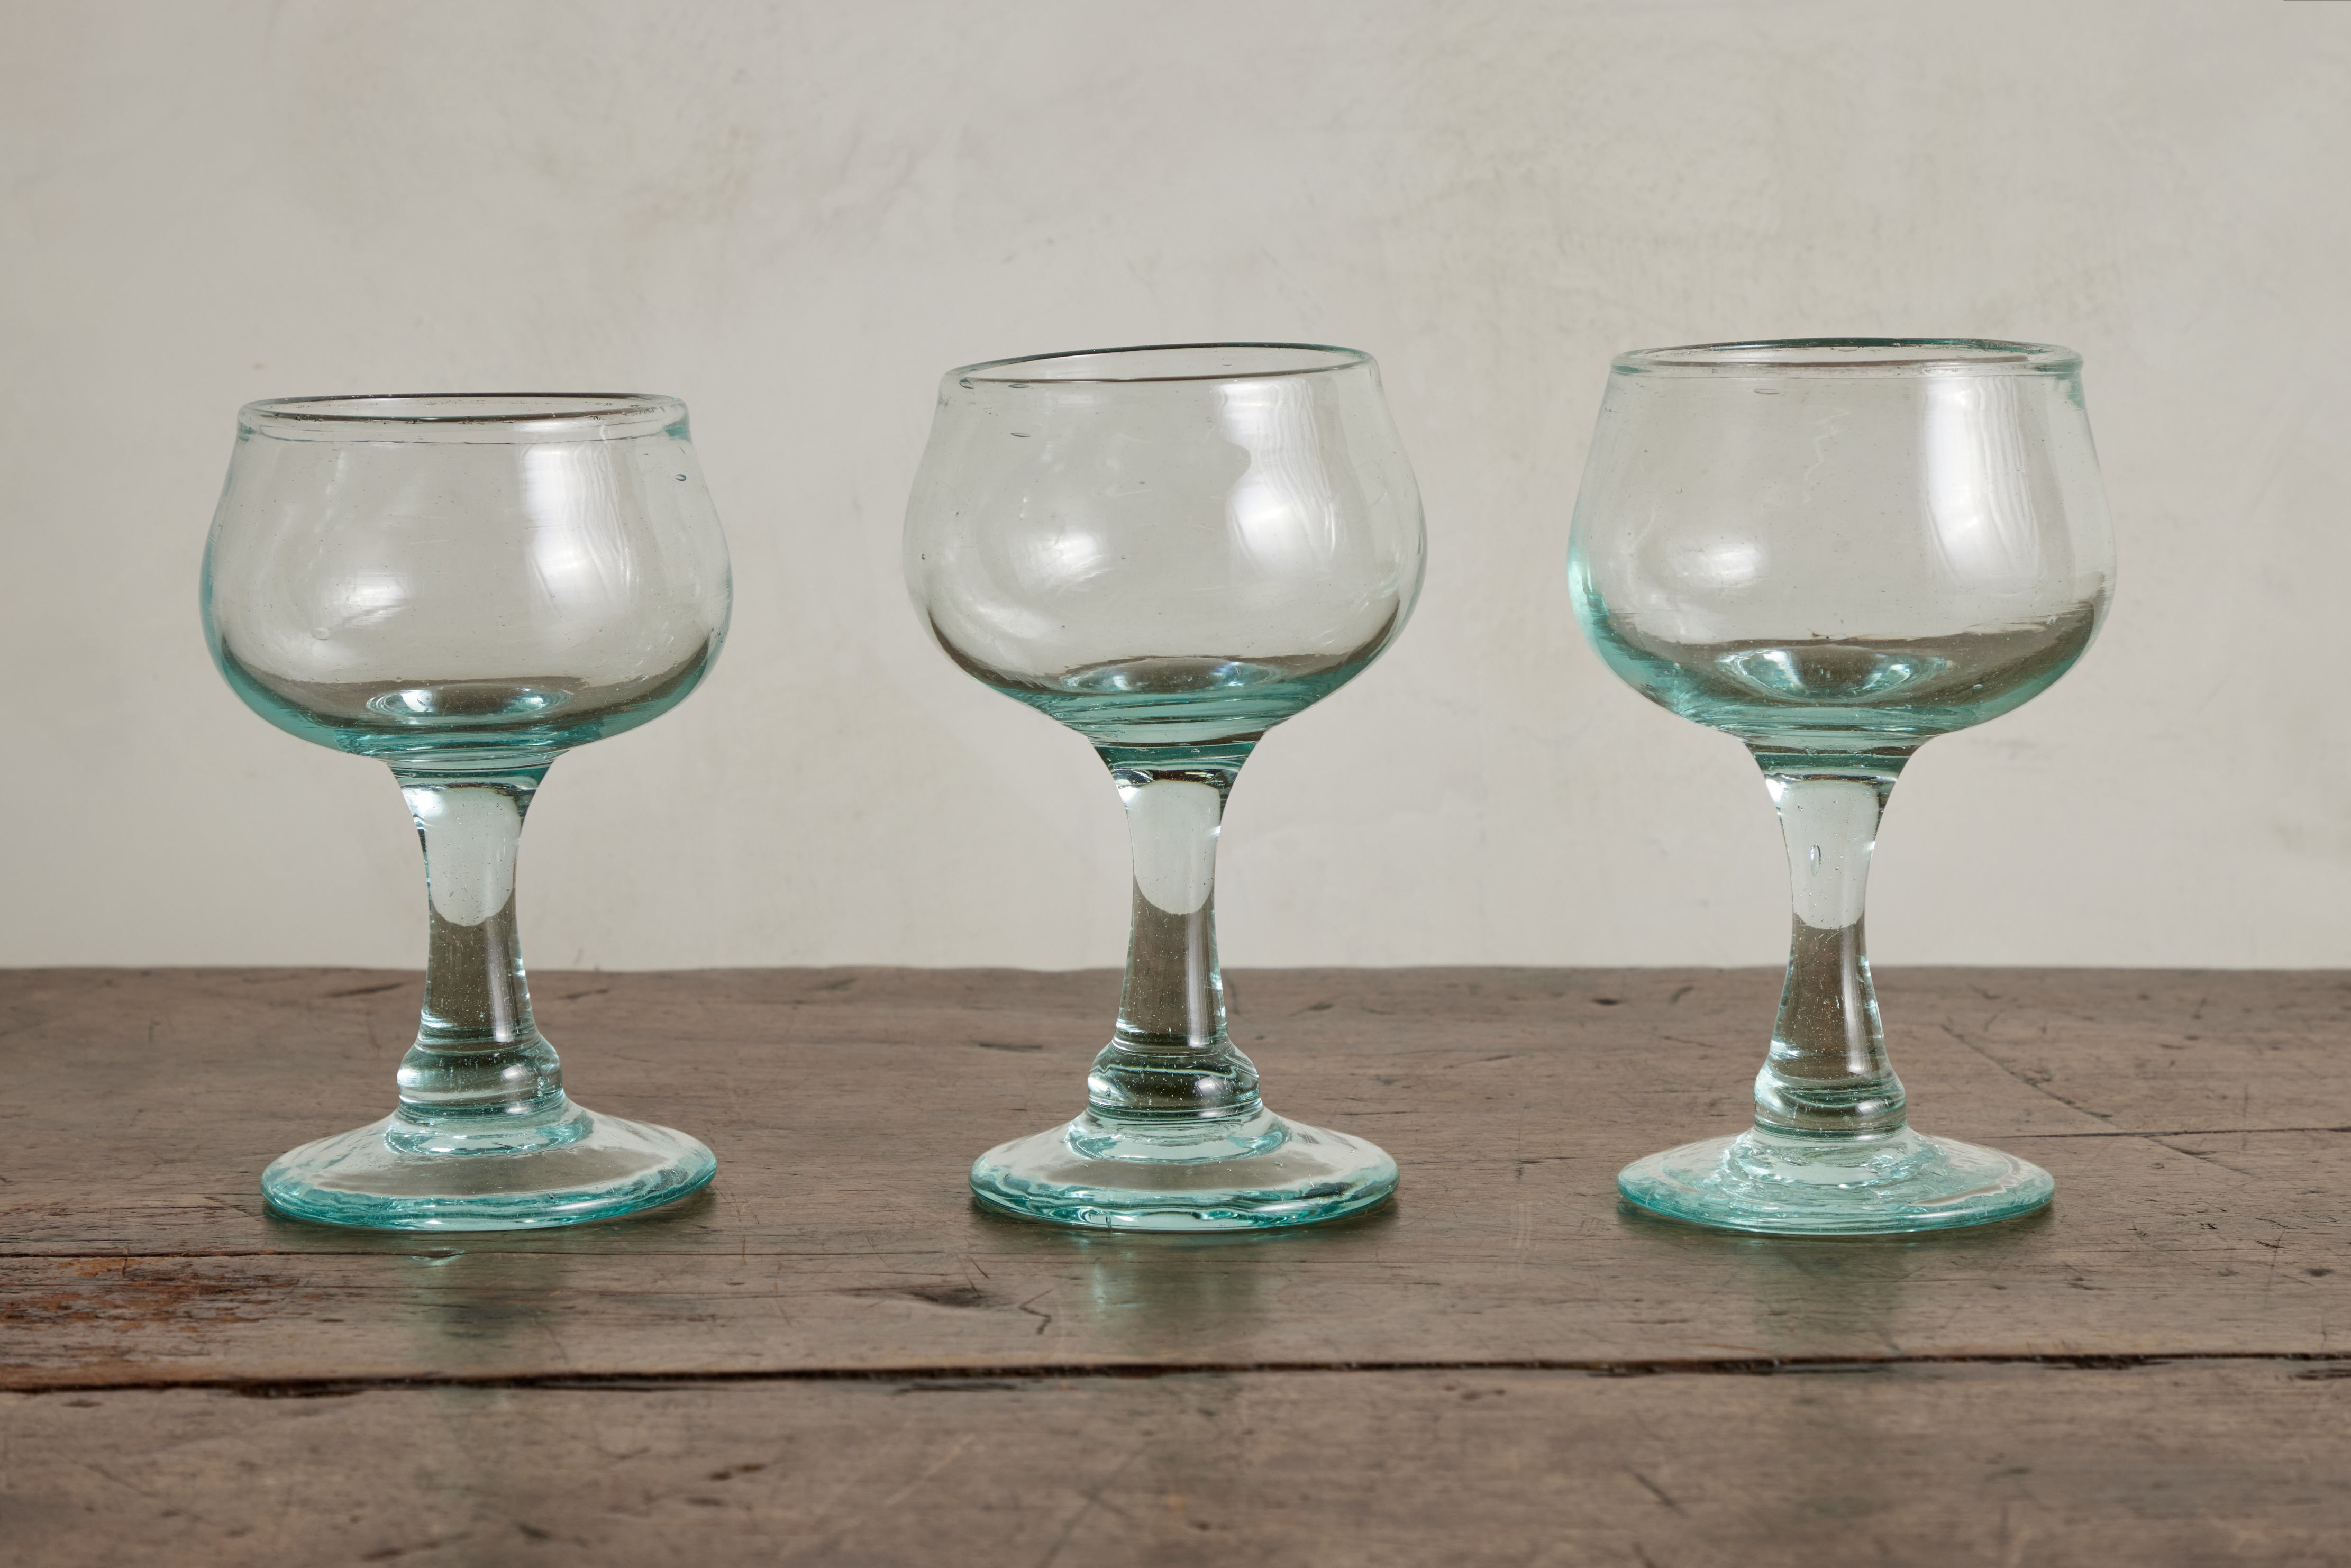 Martini - La Soufflerie - Hand blown from recycled glass